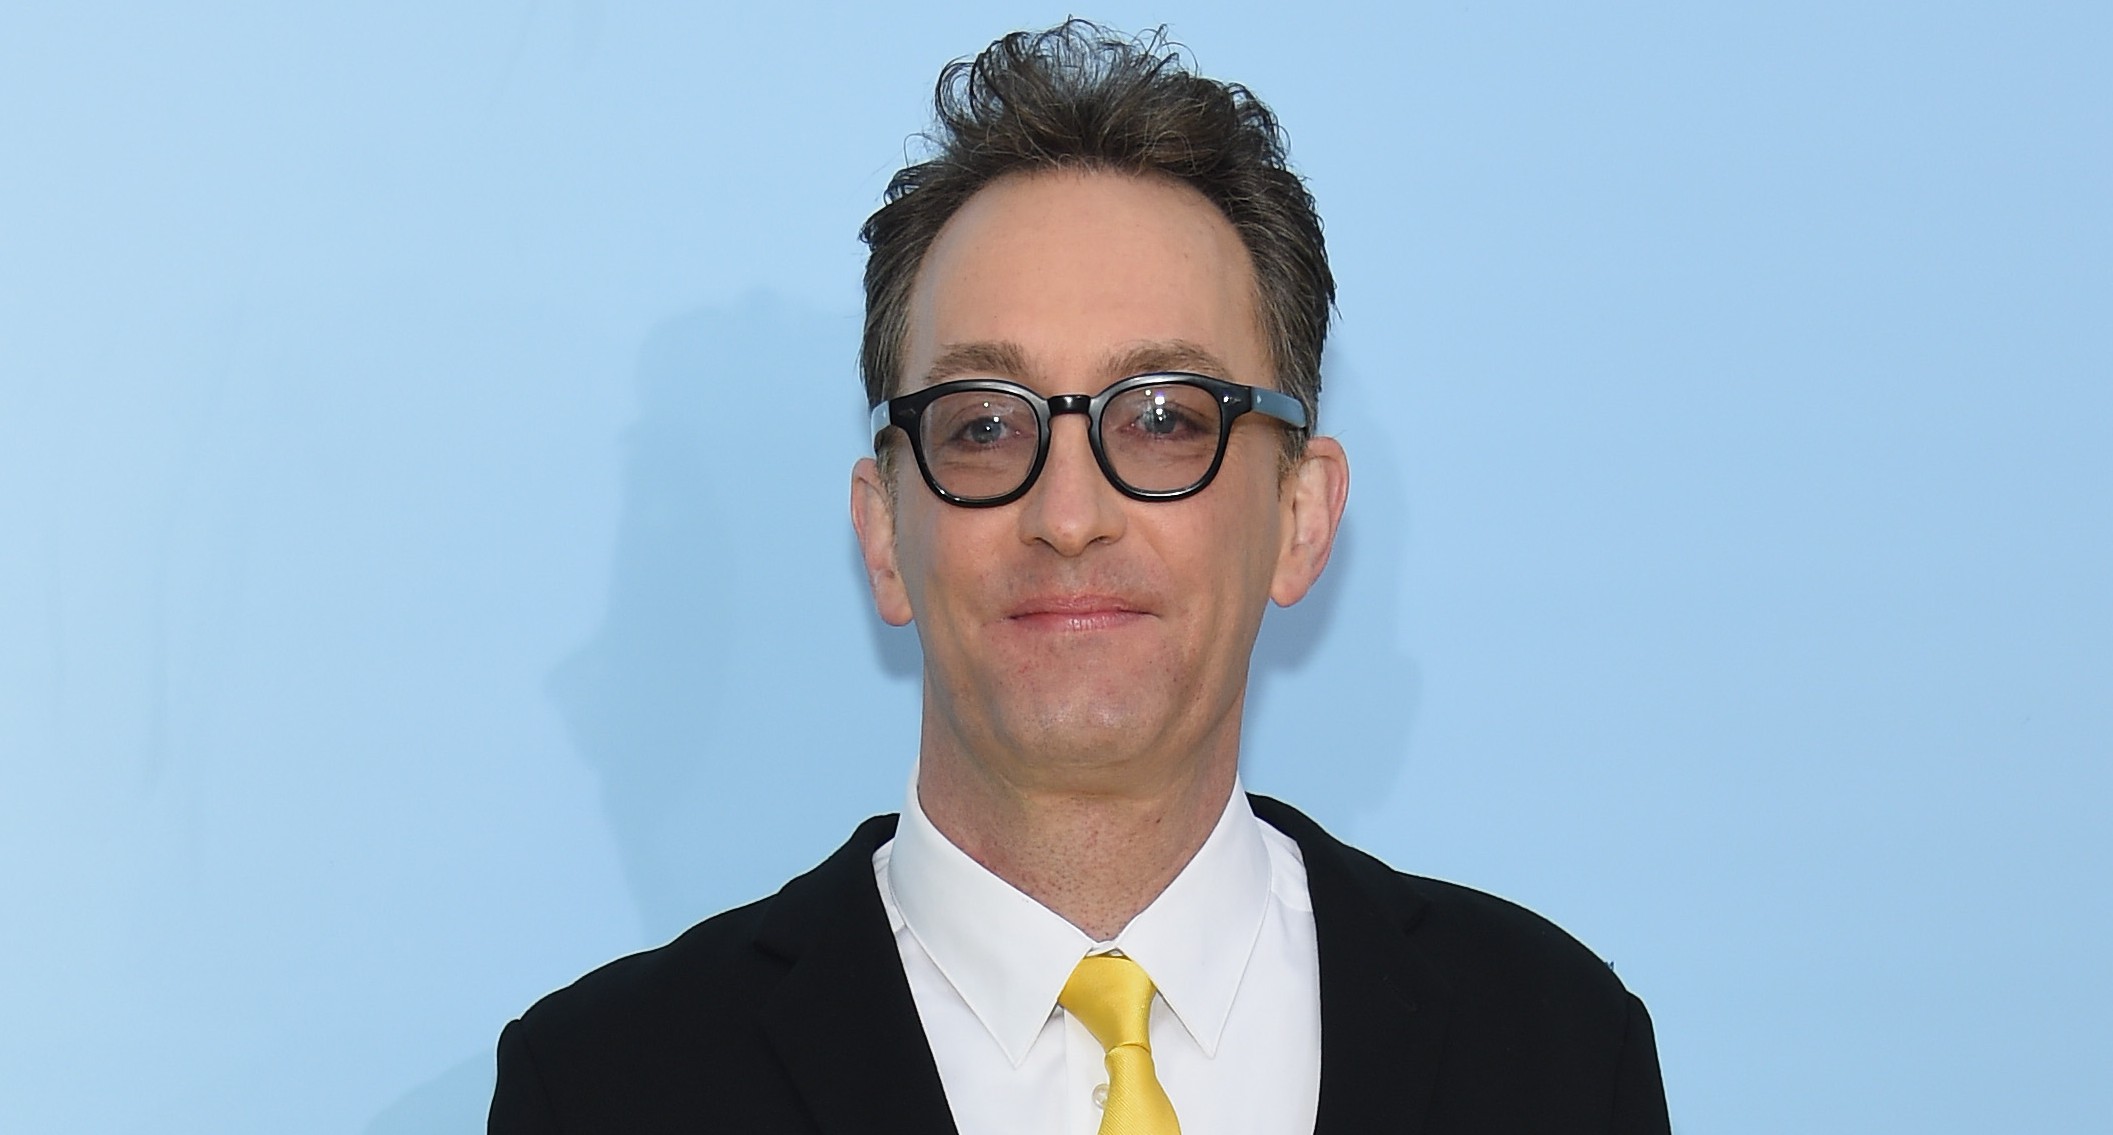 Tom kenny height